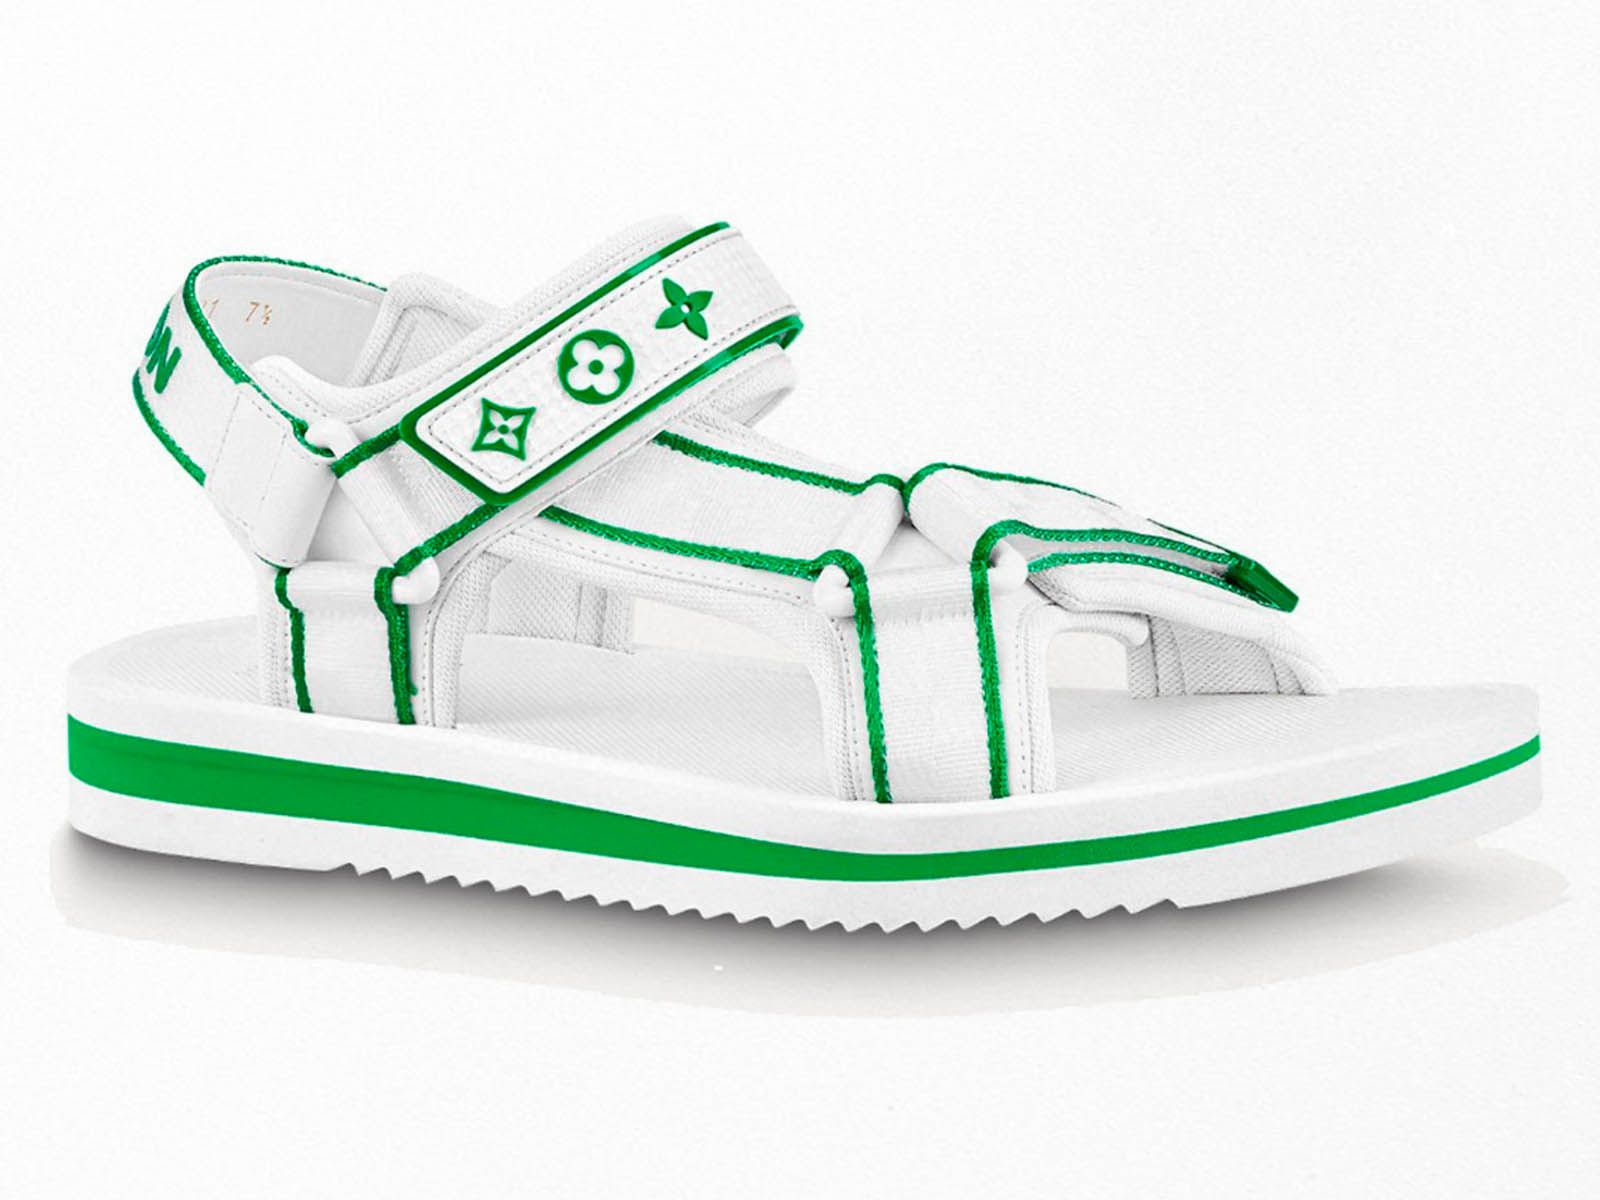 Back to the routine with Louis Vuitton’s Panama sandals